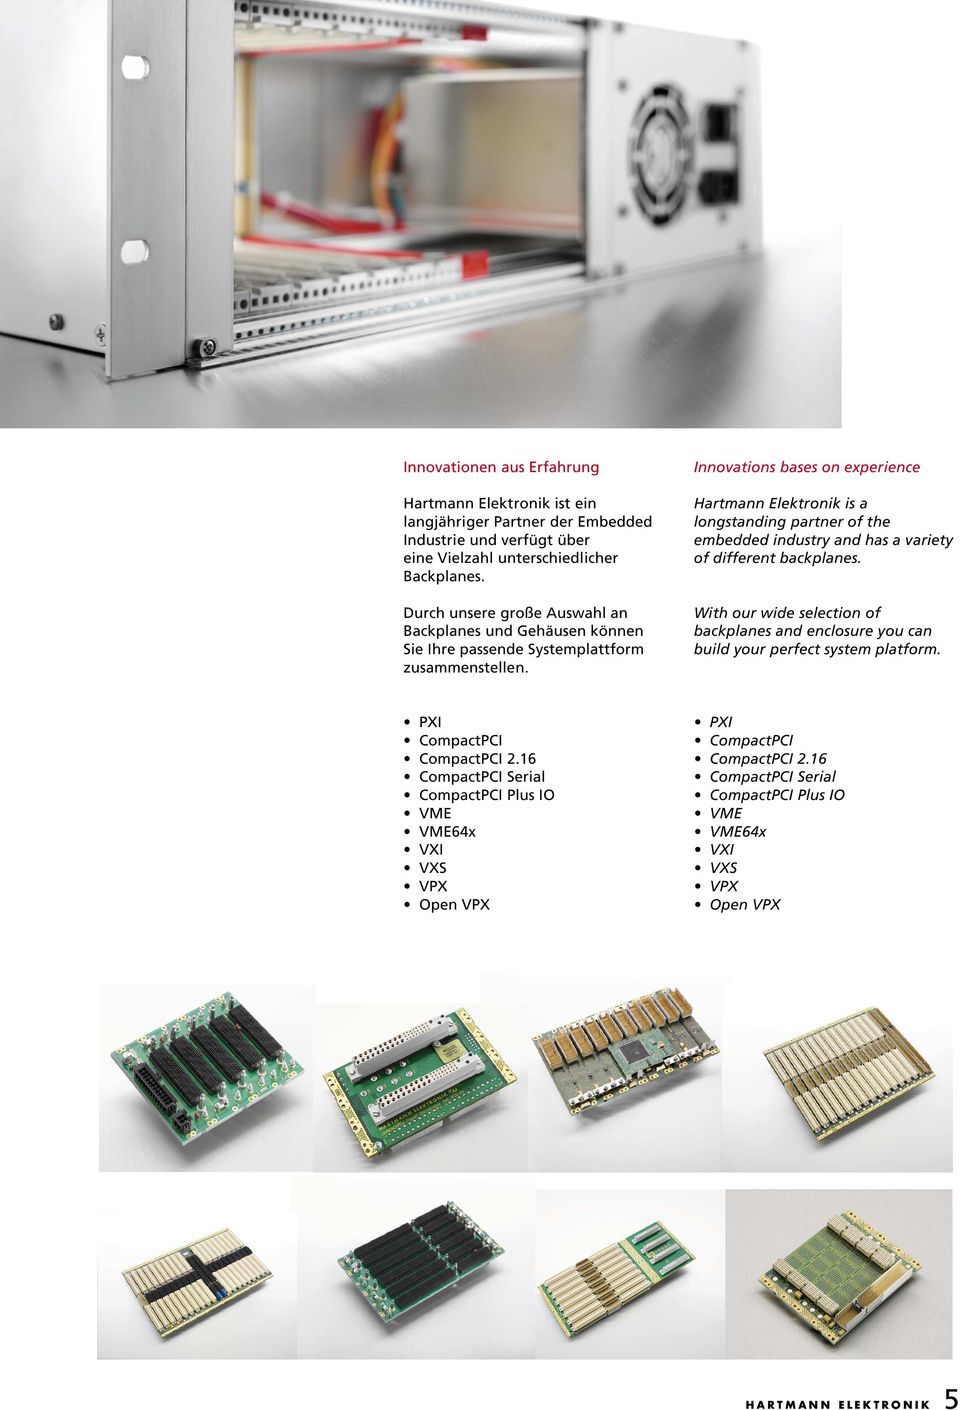 Innovations bases on experience Hartmann Elektronik is a longstanding partner of the embedded industry and has a variety of different backplanes.